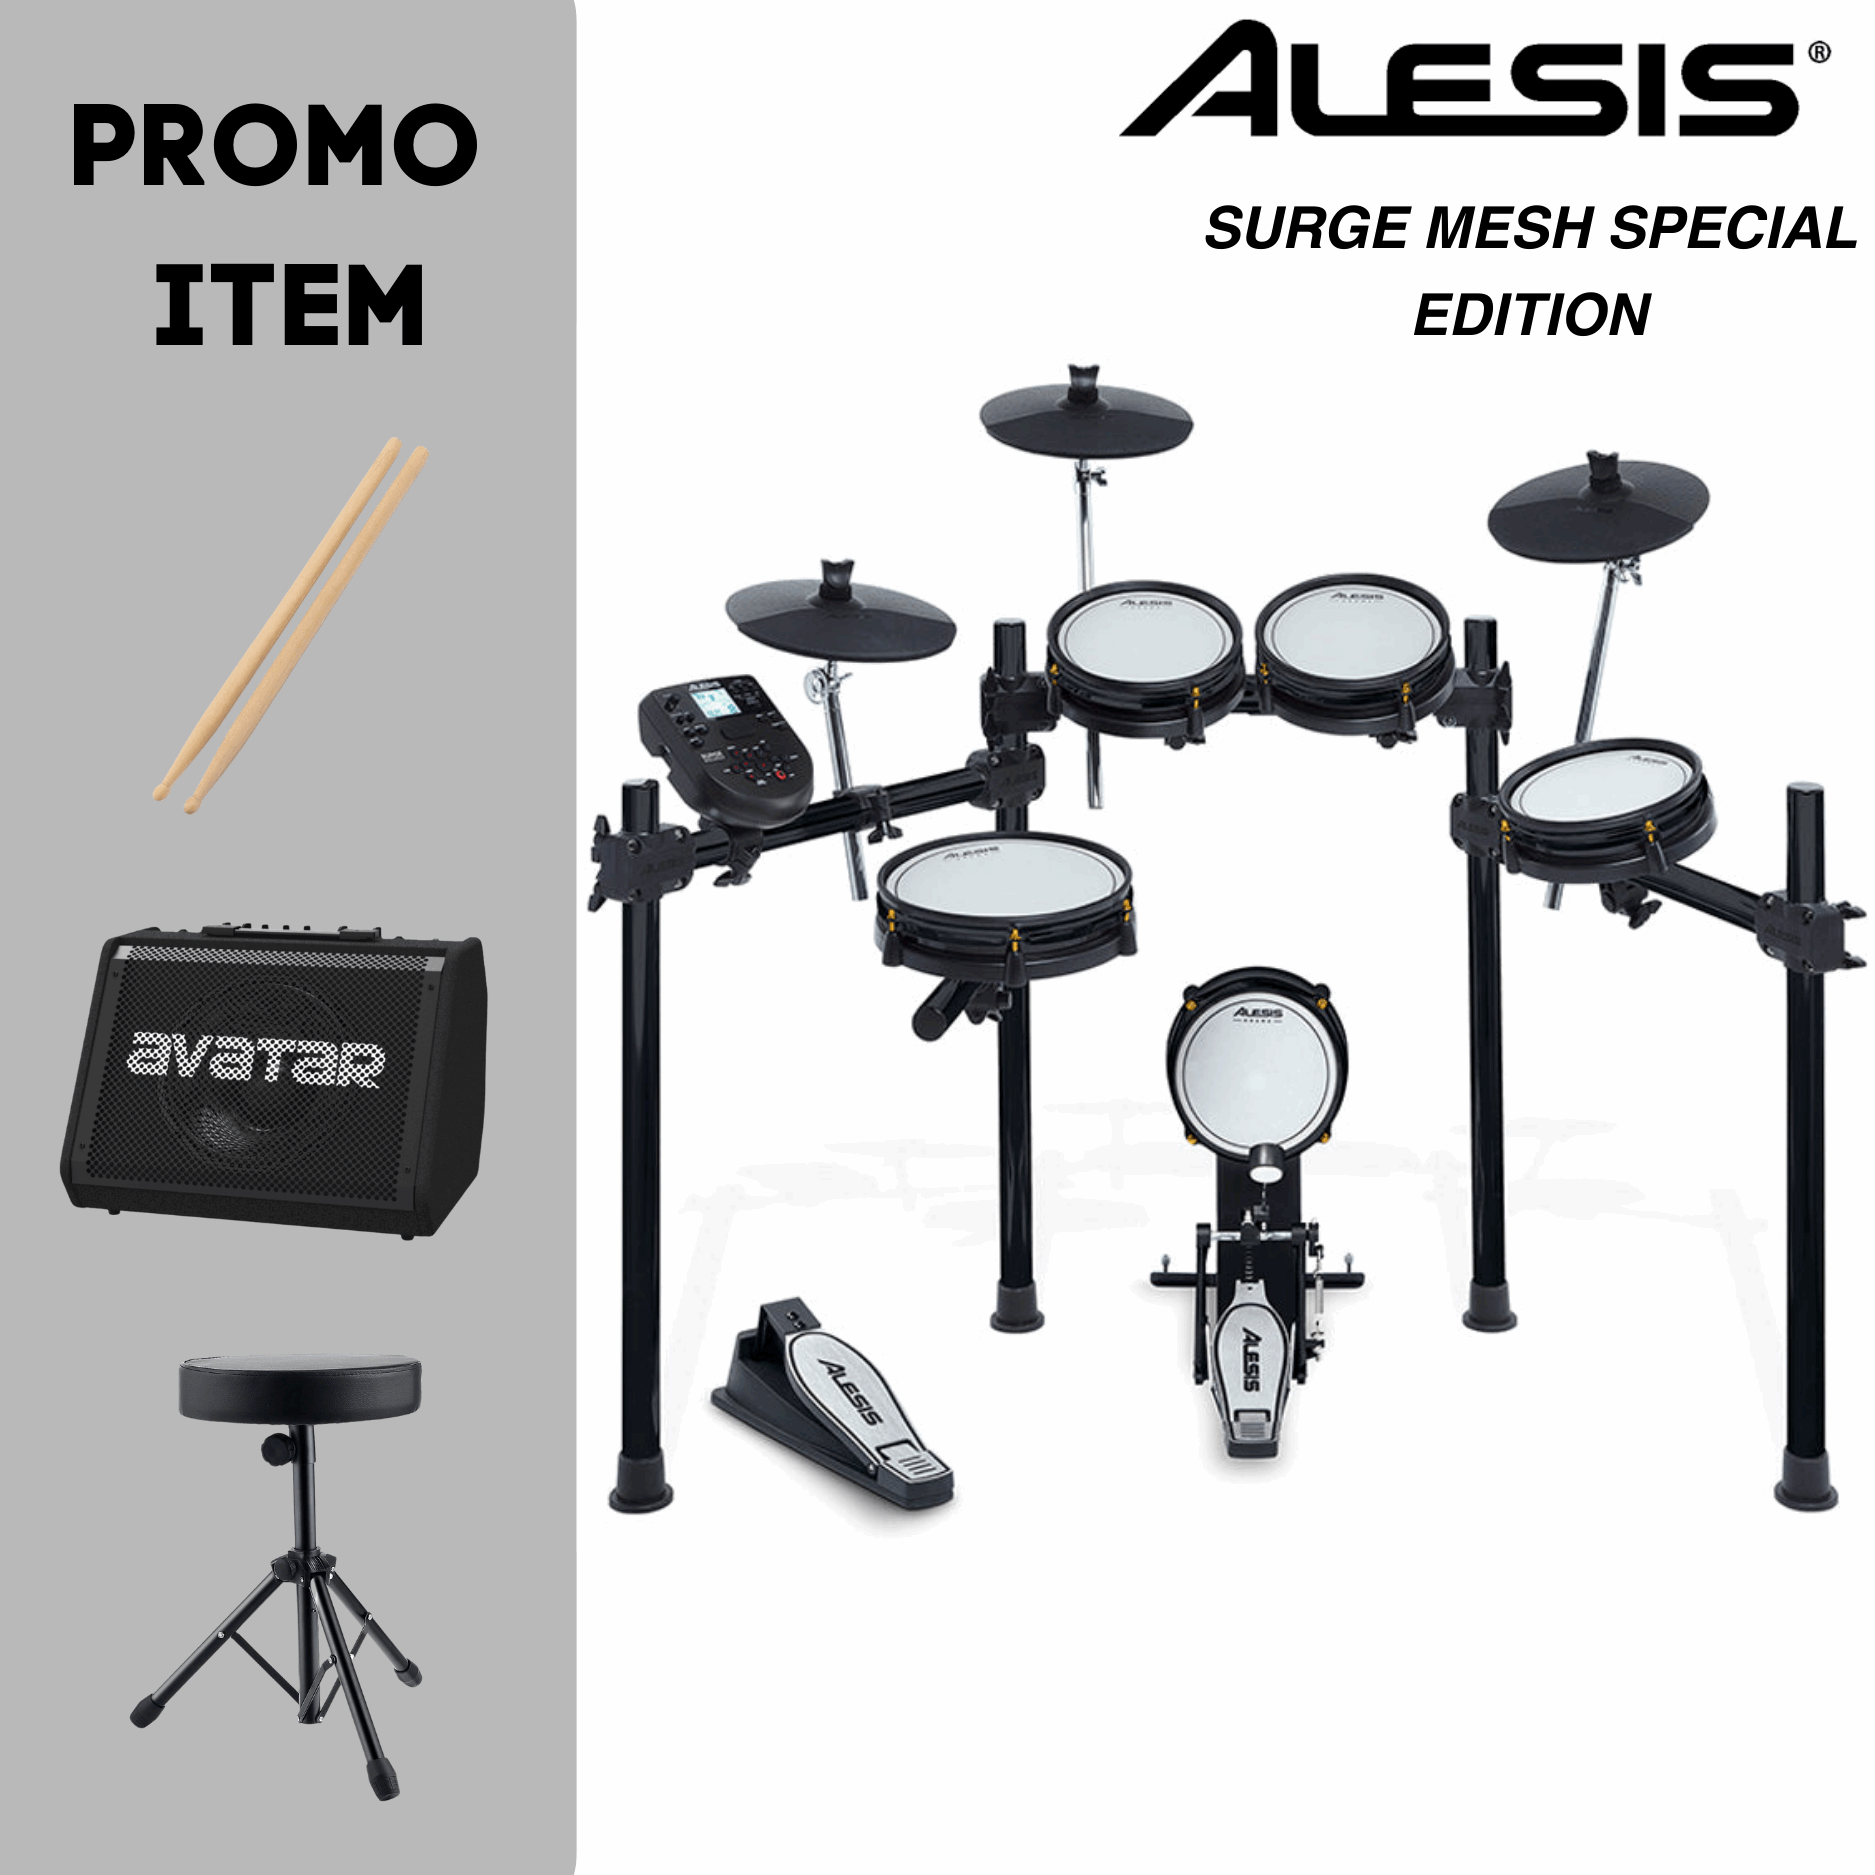 Alesis Surge Mesh Special Edition With Promo Items Zoso Music